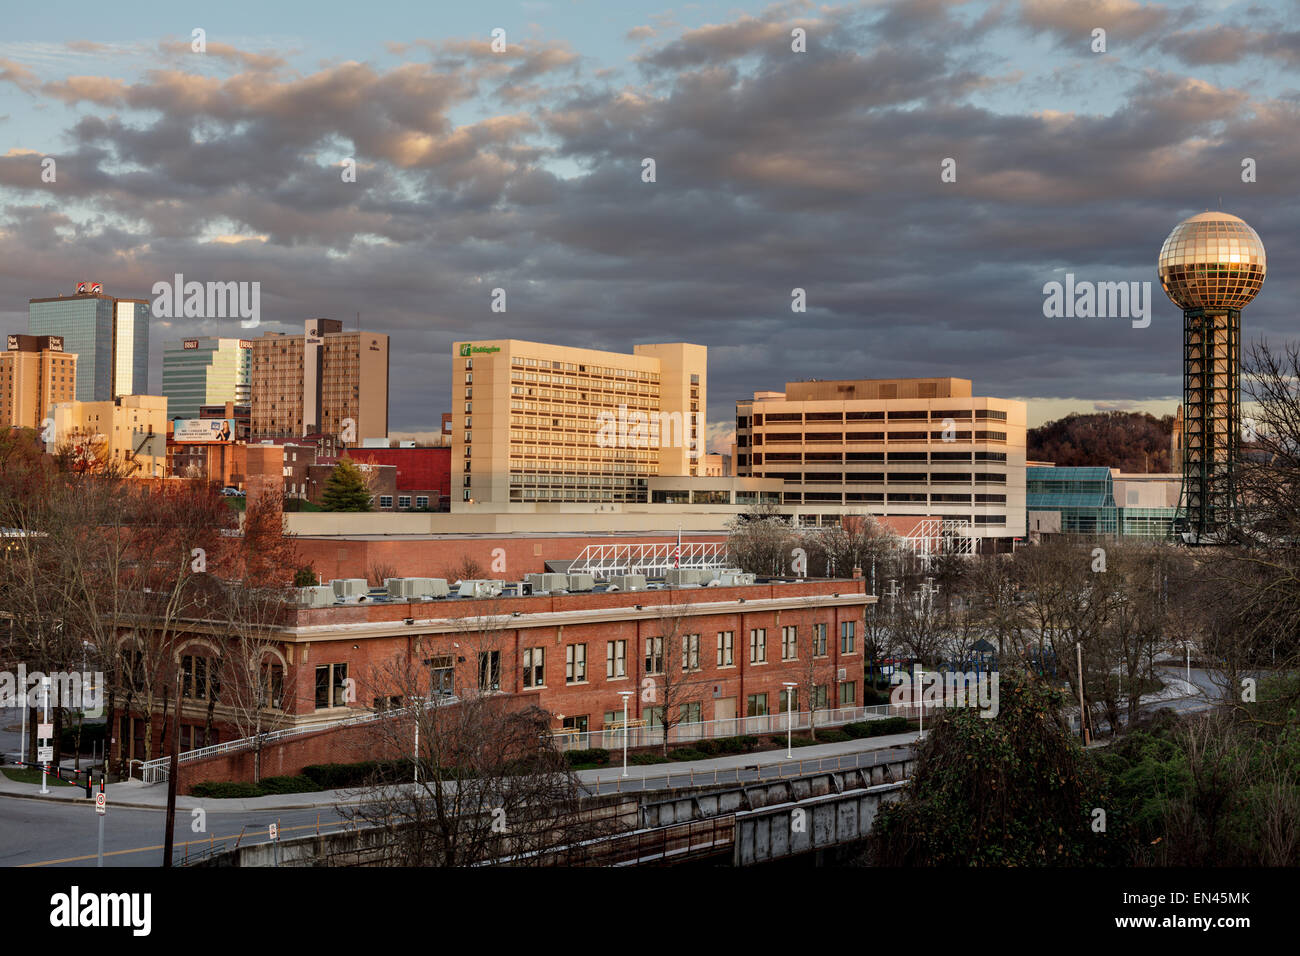 Skyline of the city of Knoxville, Tennessee. Stock Photo